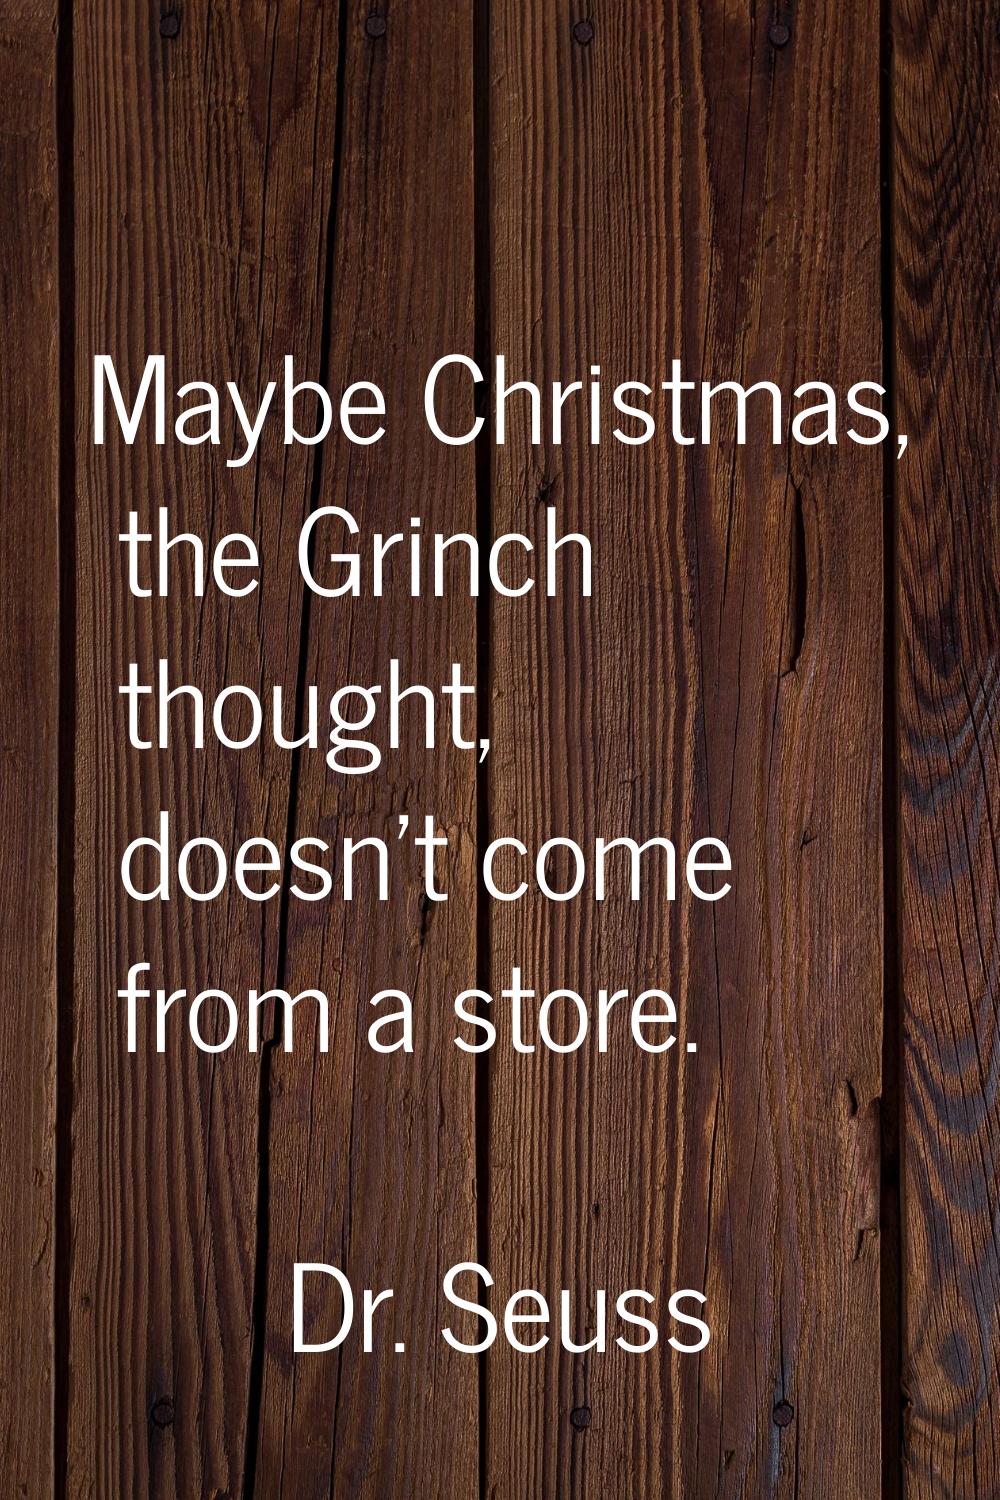 Maybe Christmas, the Grinch thought, doesn't come from a store.